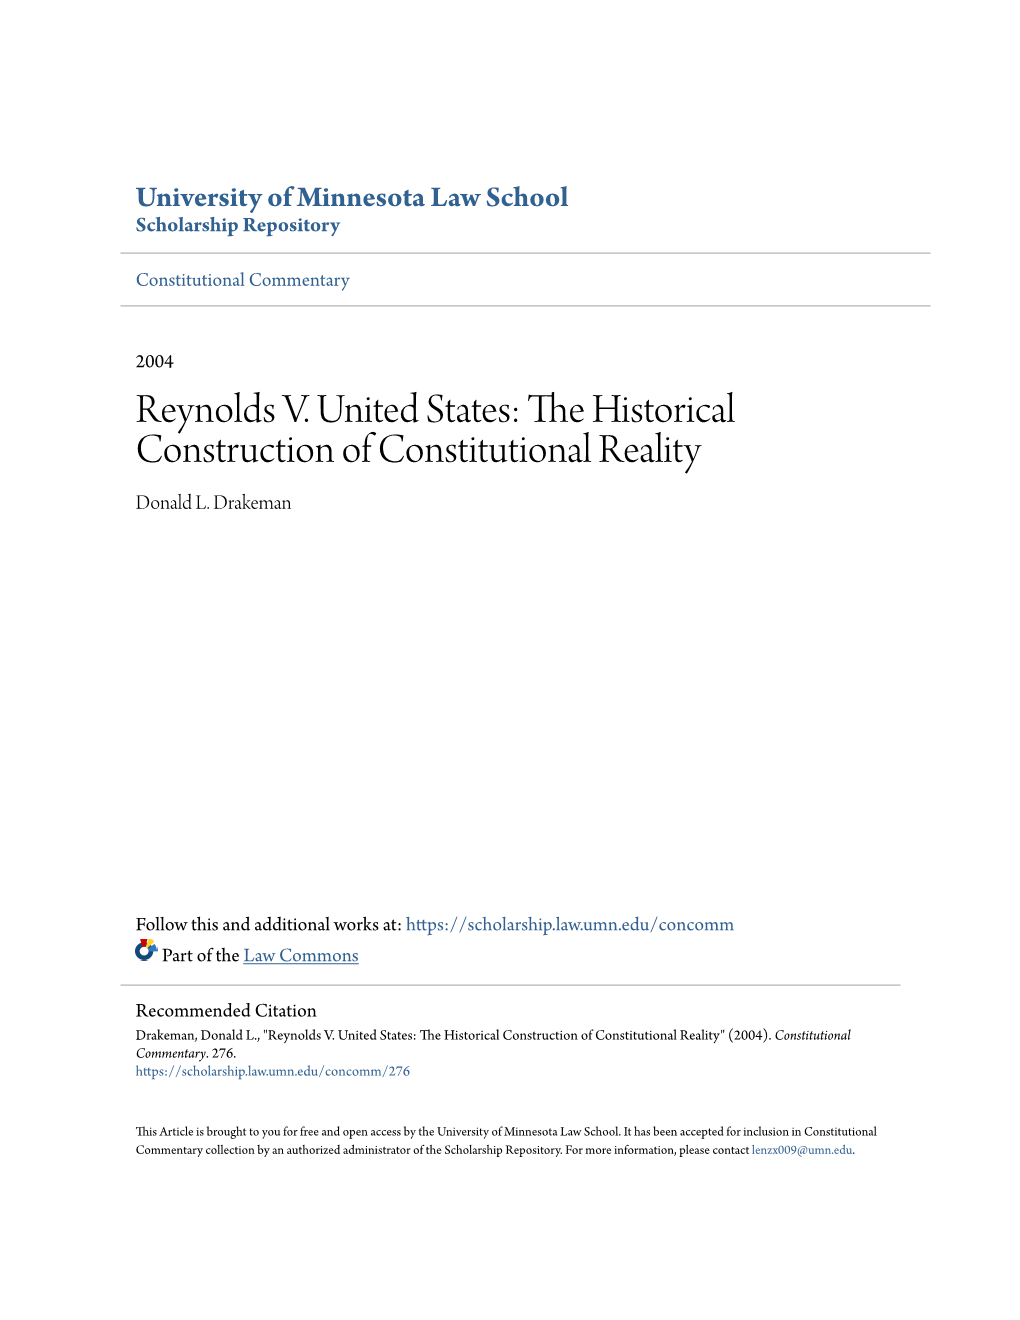 Reynolds V. United States: the Ih Storical Construction of Constitutional Reality Donald L